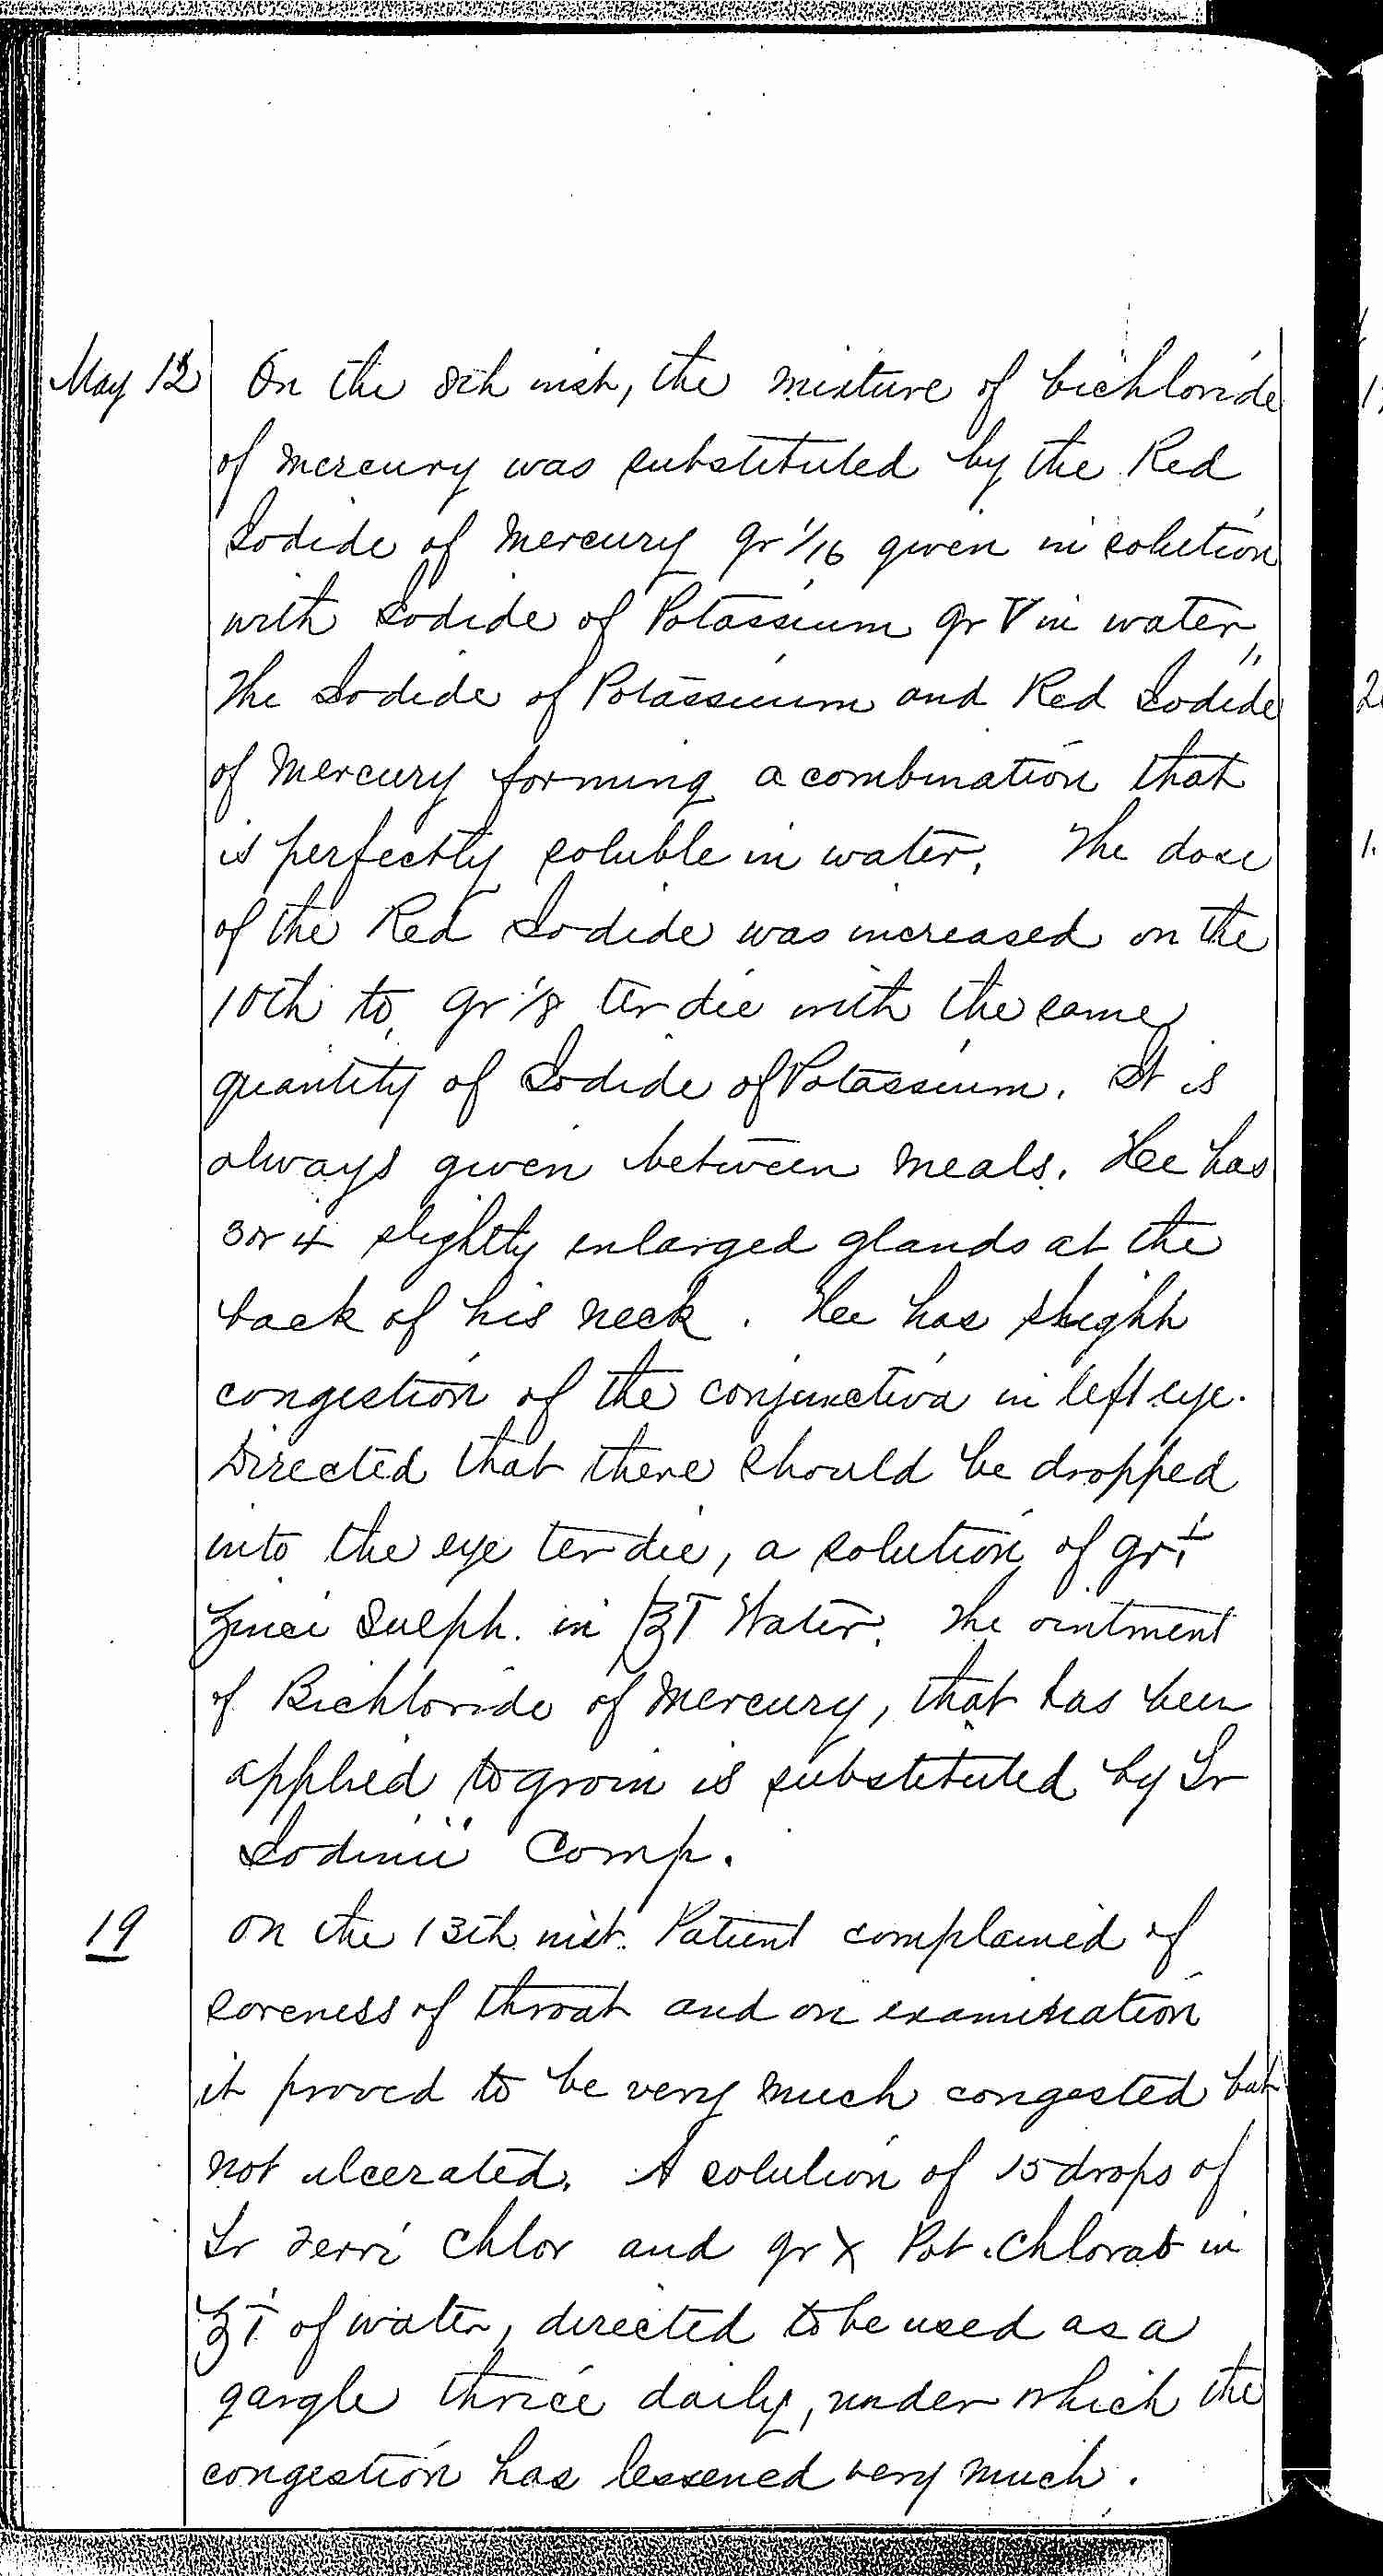 Entry for John H. Denning (first admission page 8 of 9) in the log Hospital Tickets and Case Papers - Naval Hospital - Washington, D.C. - 1868-69